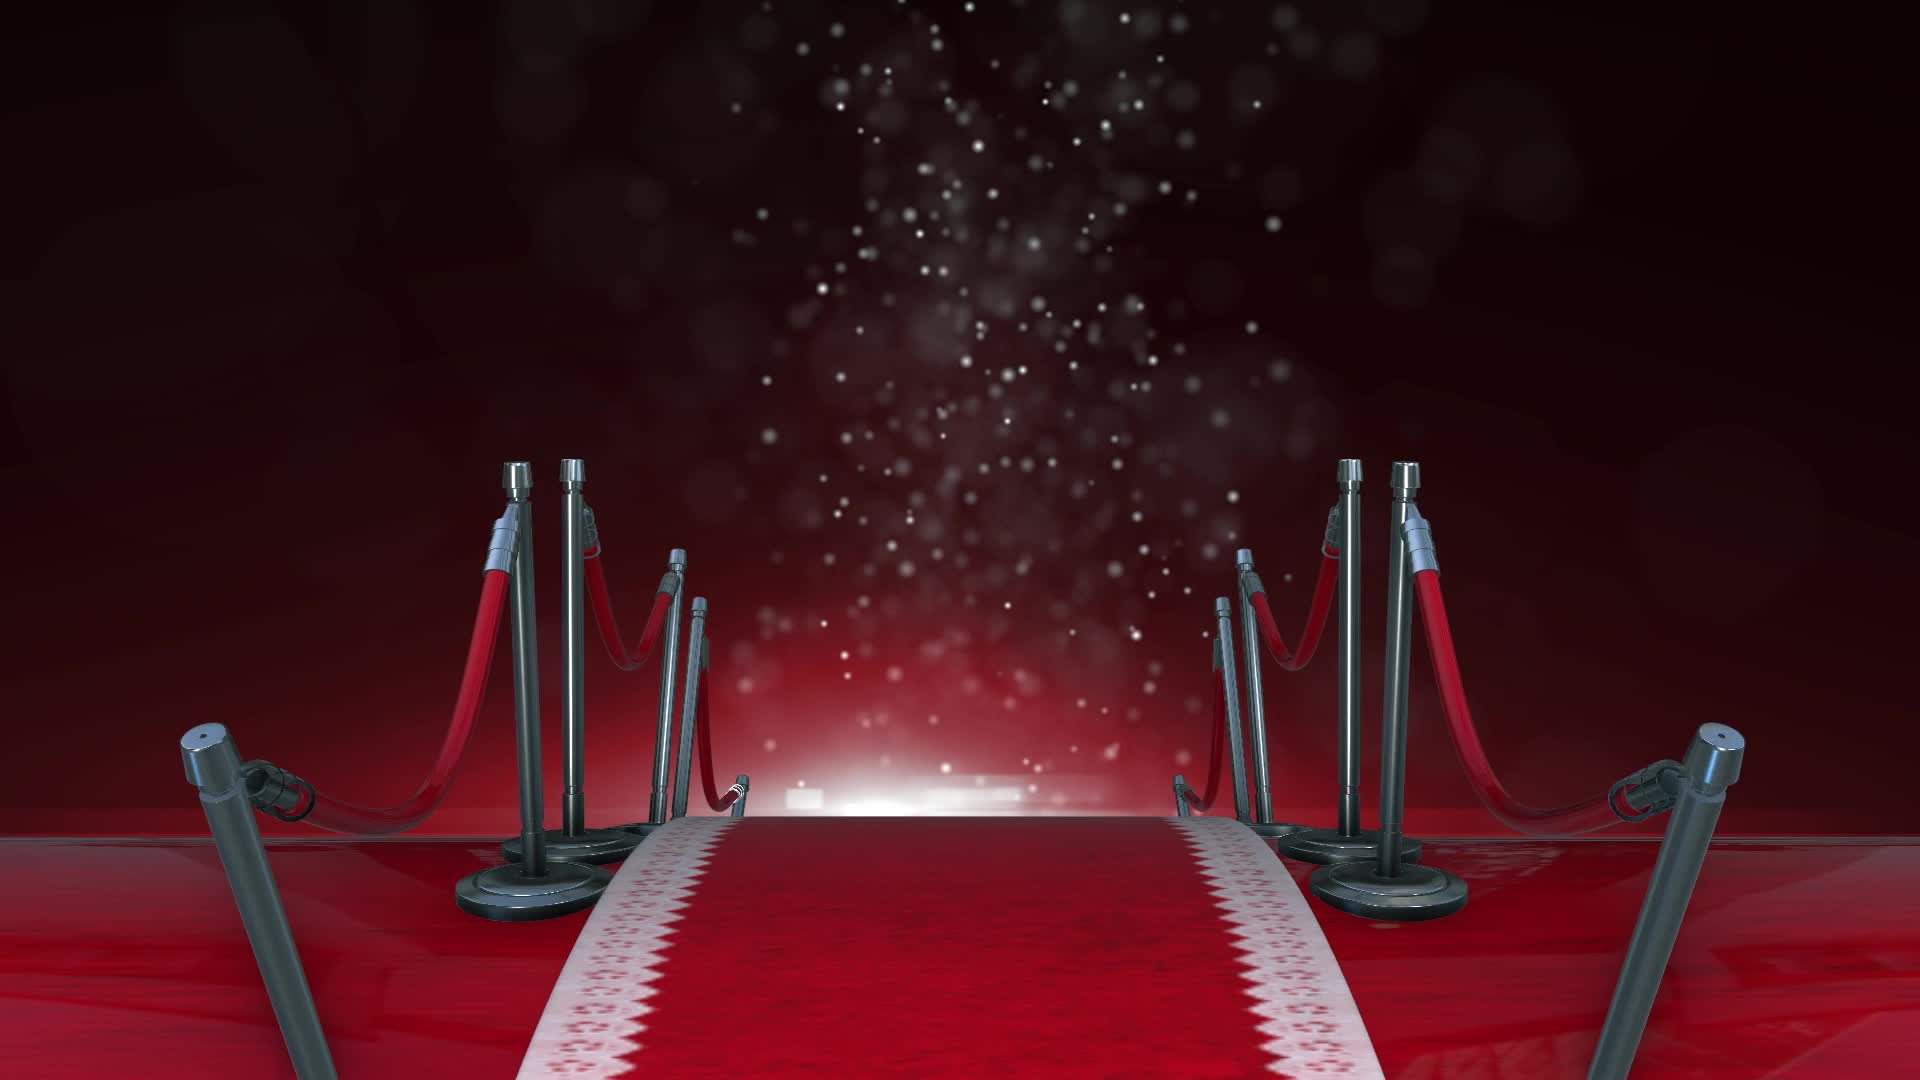 Yeele Stage Red Carpet Backdrop For Photography Vip Party Gold Polka Dots  Baby Portrait Photo Background Photocall Photo Studio  Backgrounds   AliExpress